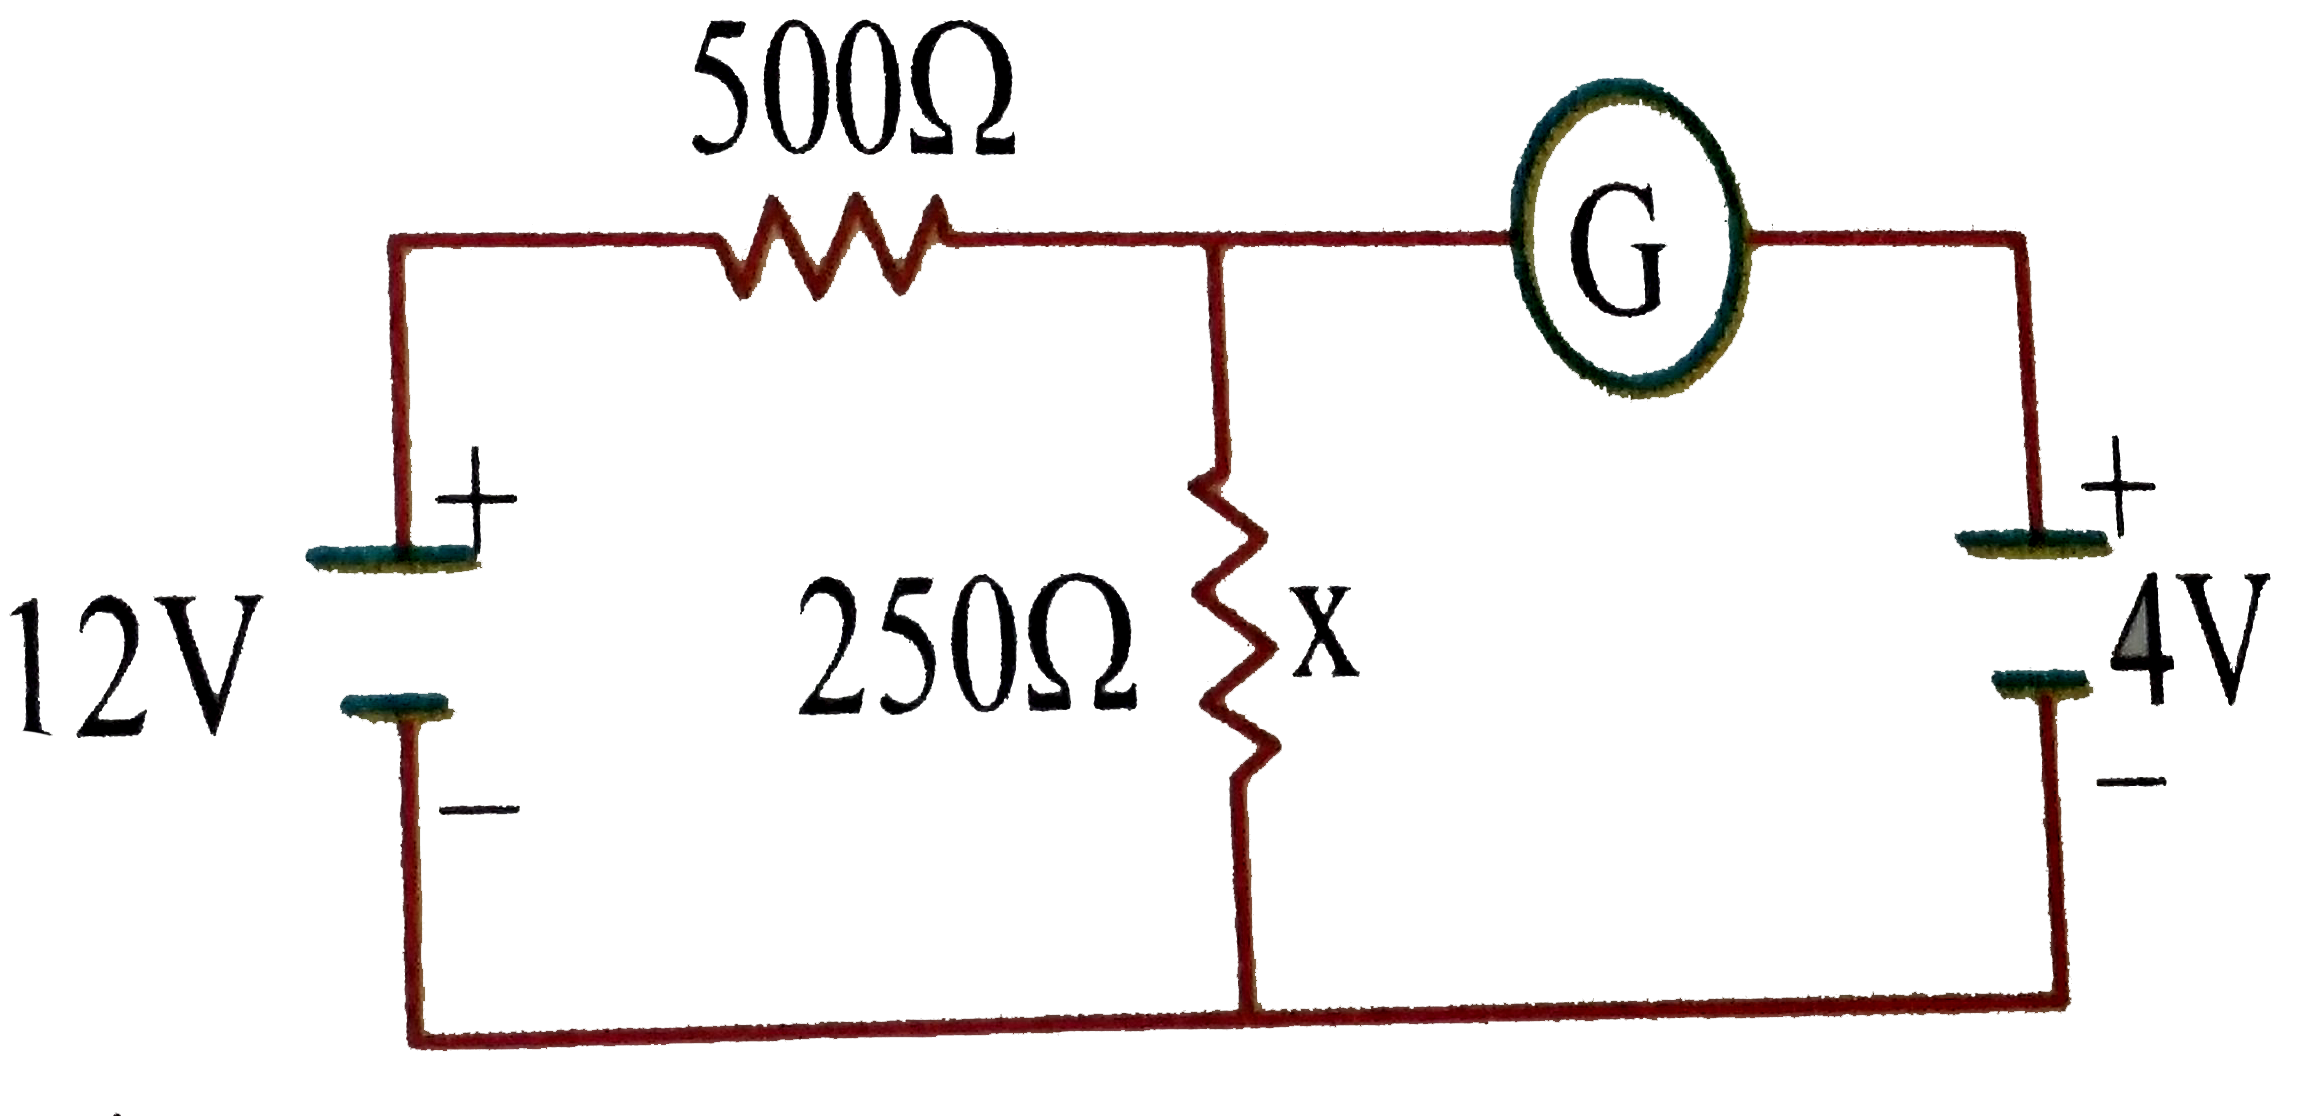 If the galvanometer reading is zero in the given circuit, the current passing through resistance 250Omega is